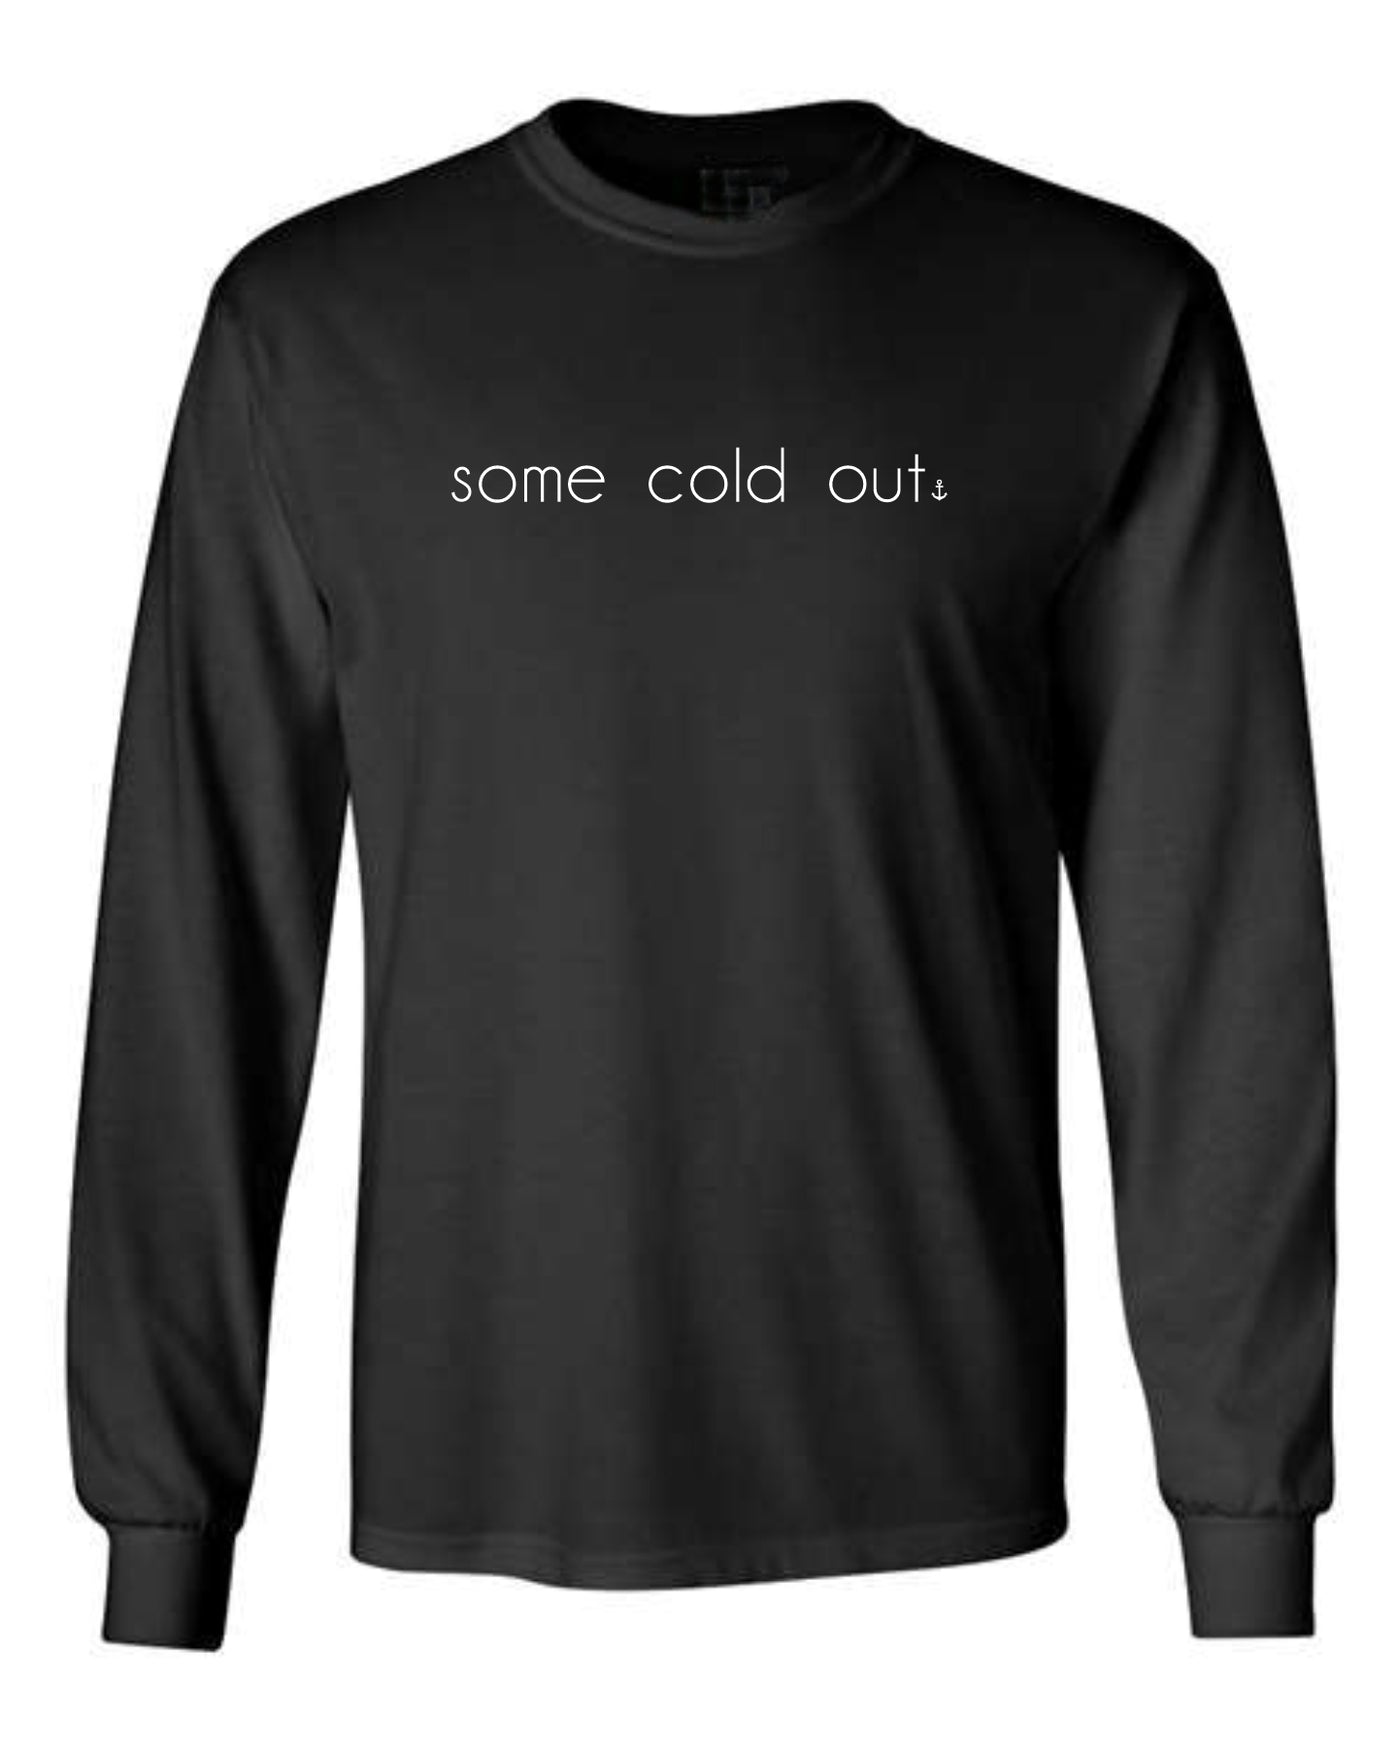 "Some Cold Out" Unisex Long Sleeve T-shirt